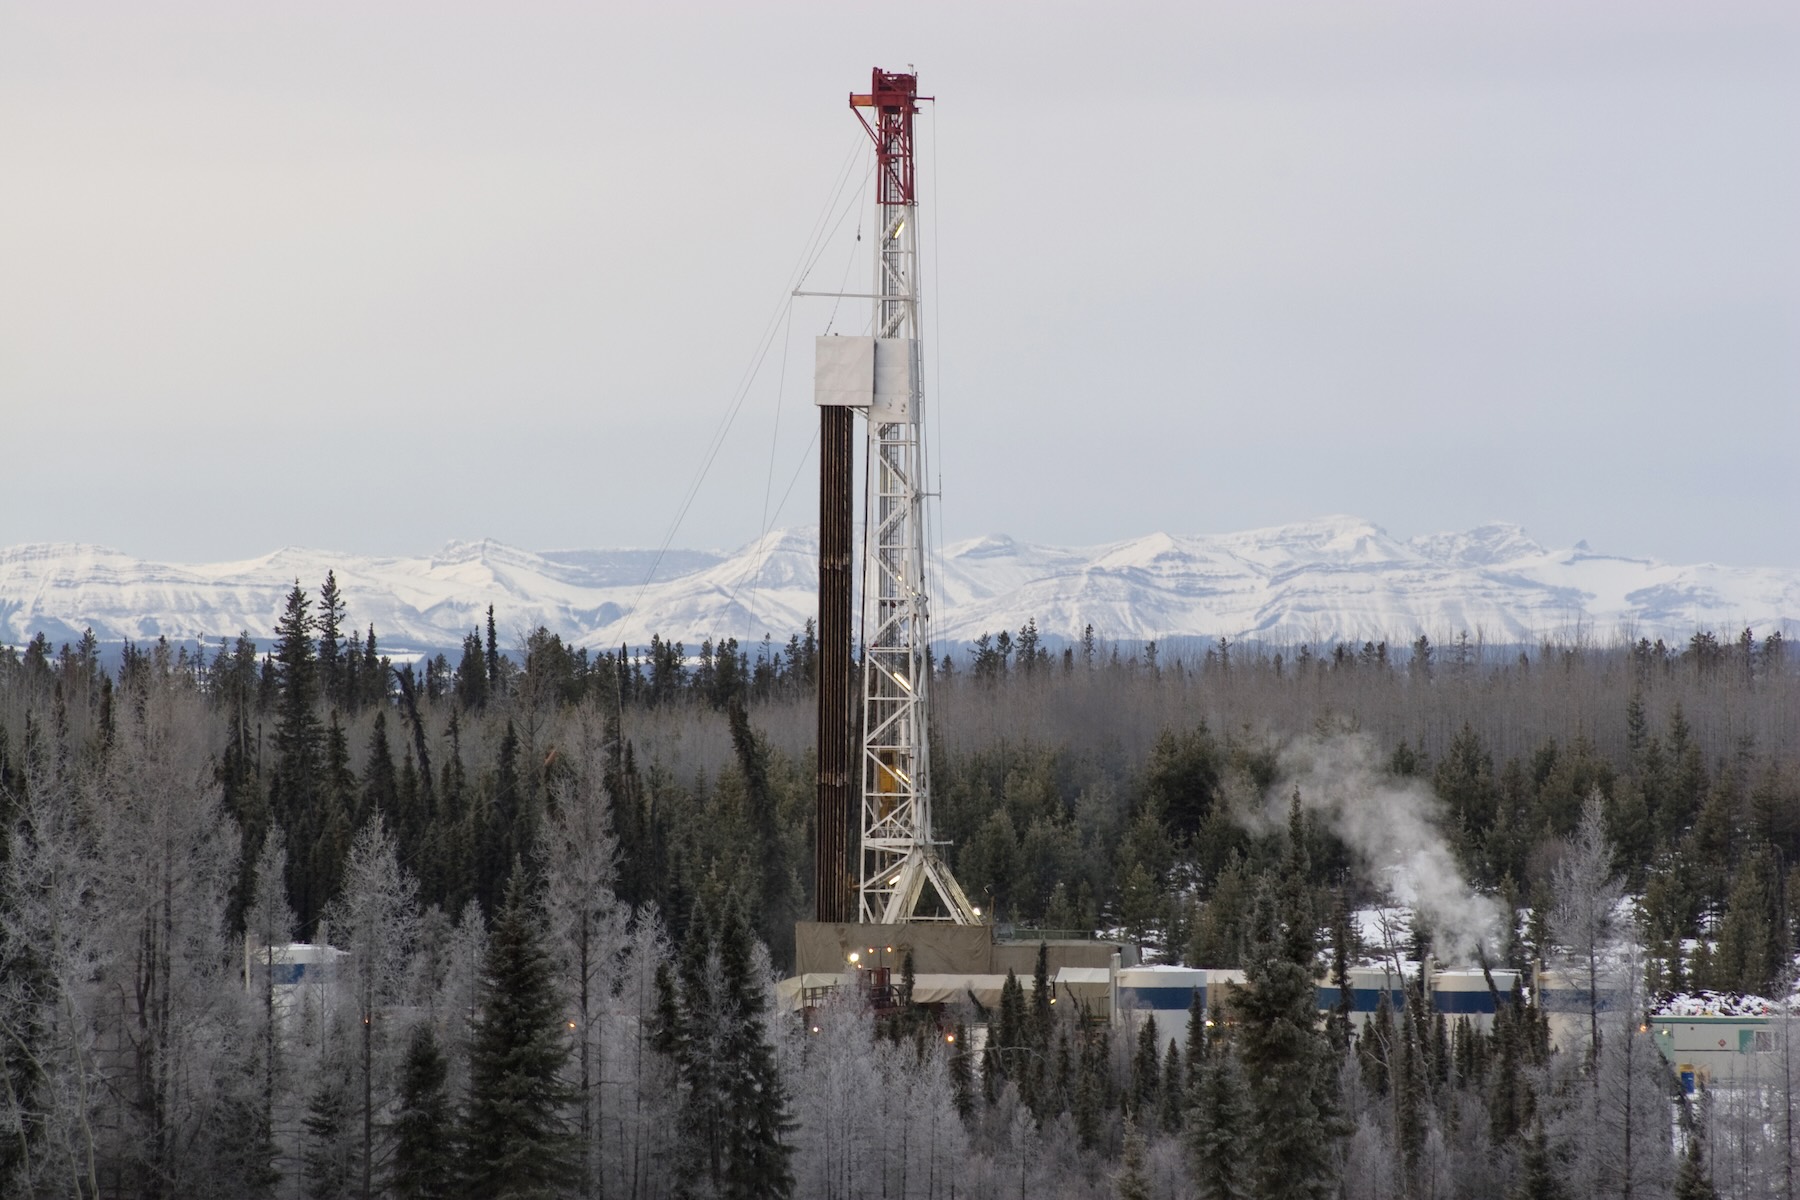 A drilling rig in the Alberta foothills.